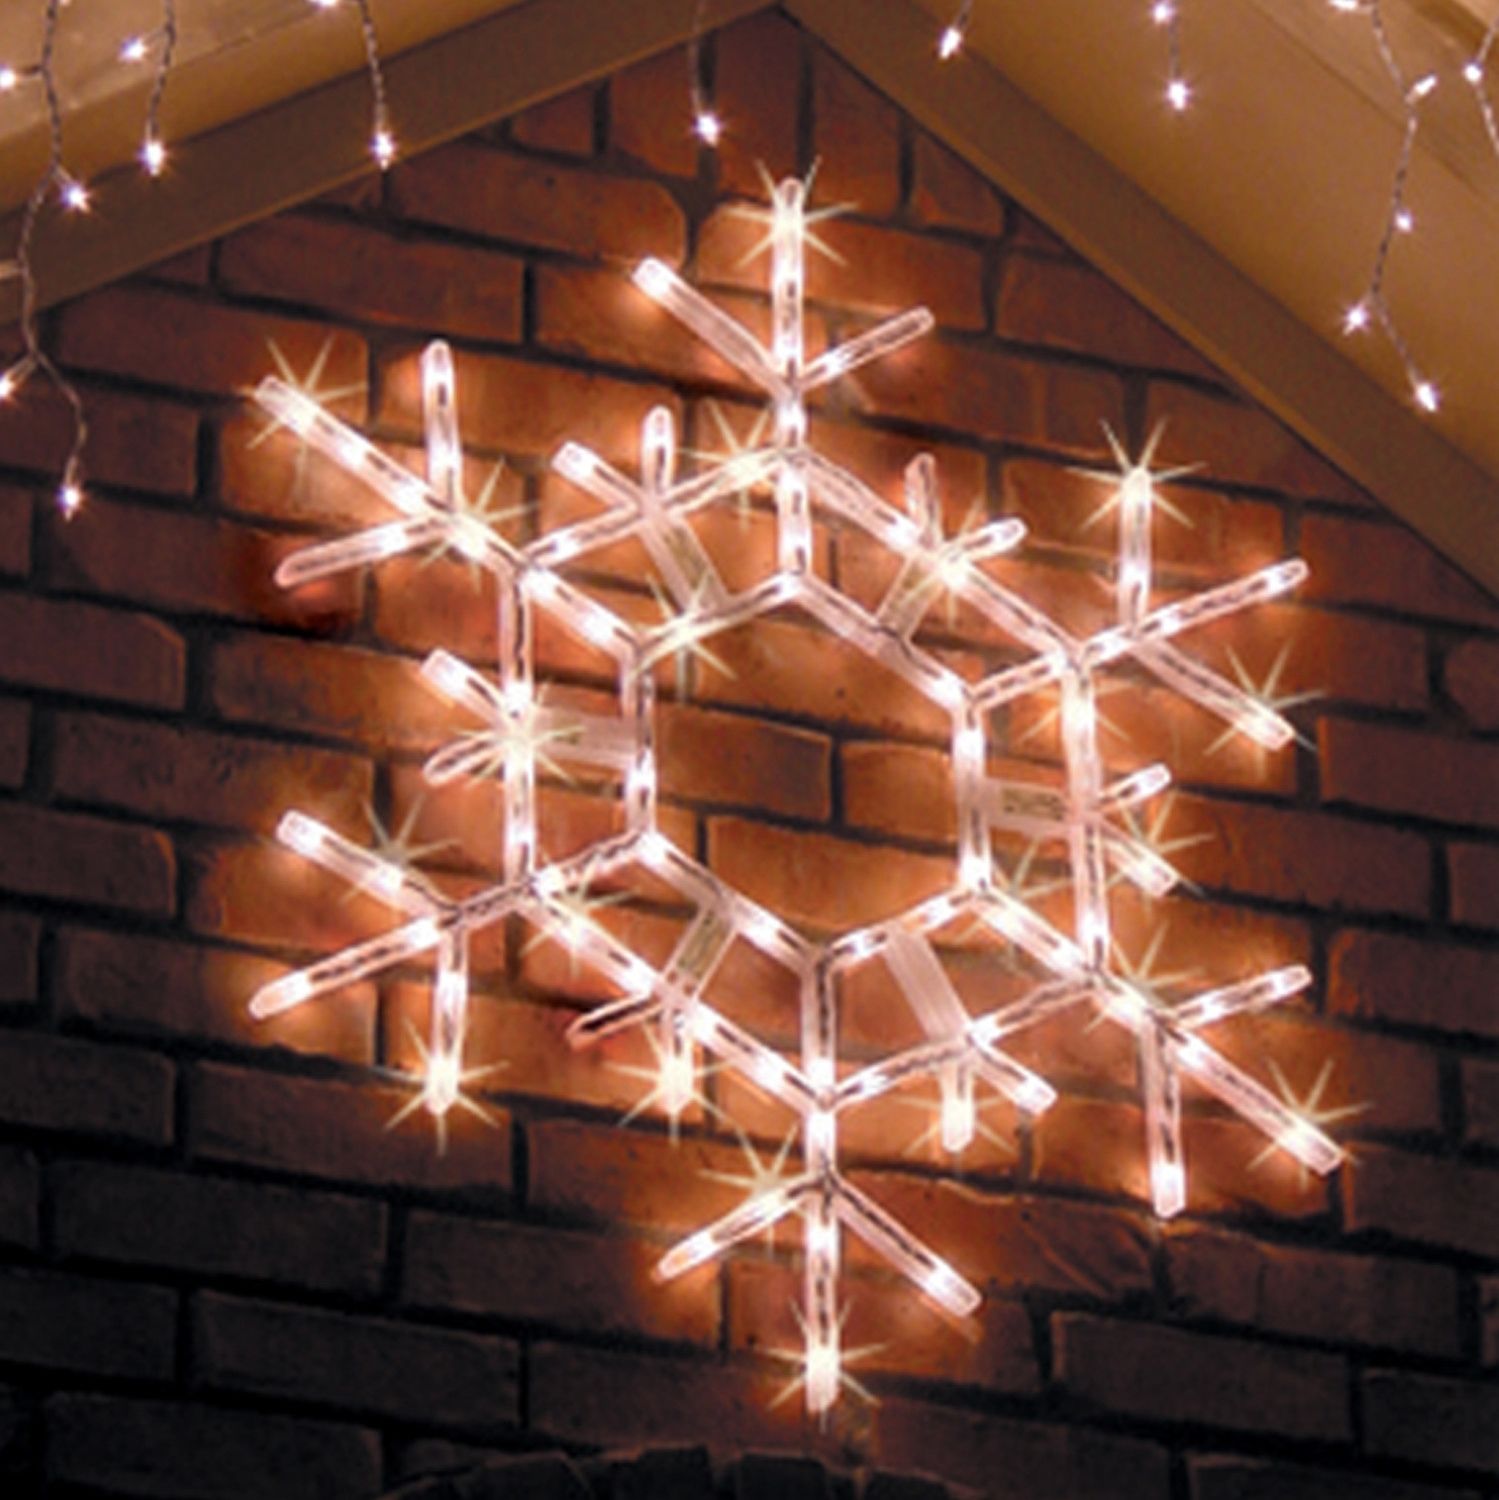 Yard Decorations, Snowflake Intended For Outdoor Hanging Ornament Lights (View 5 of 20)